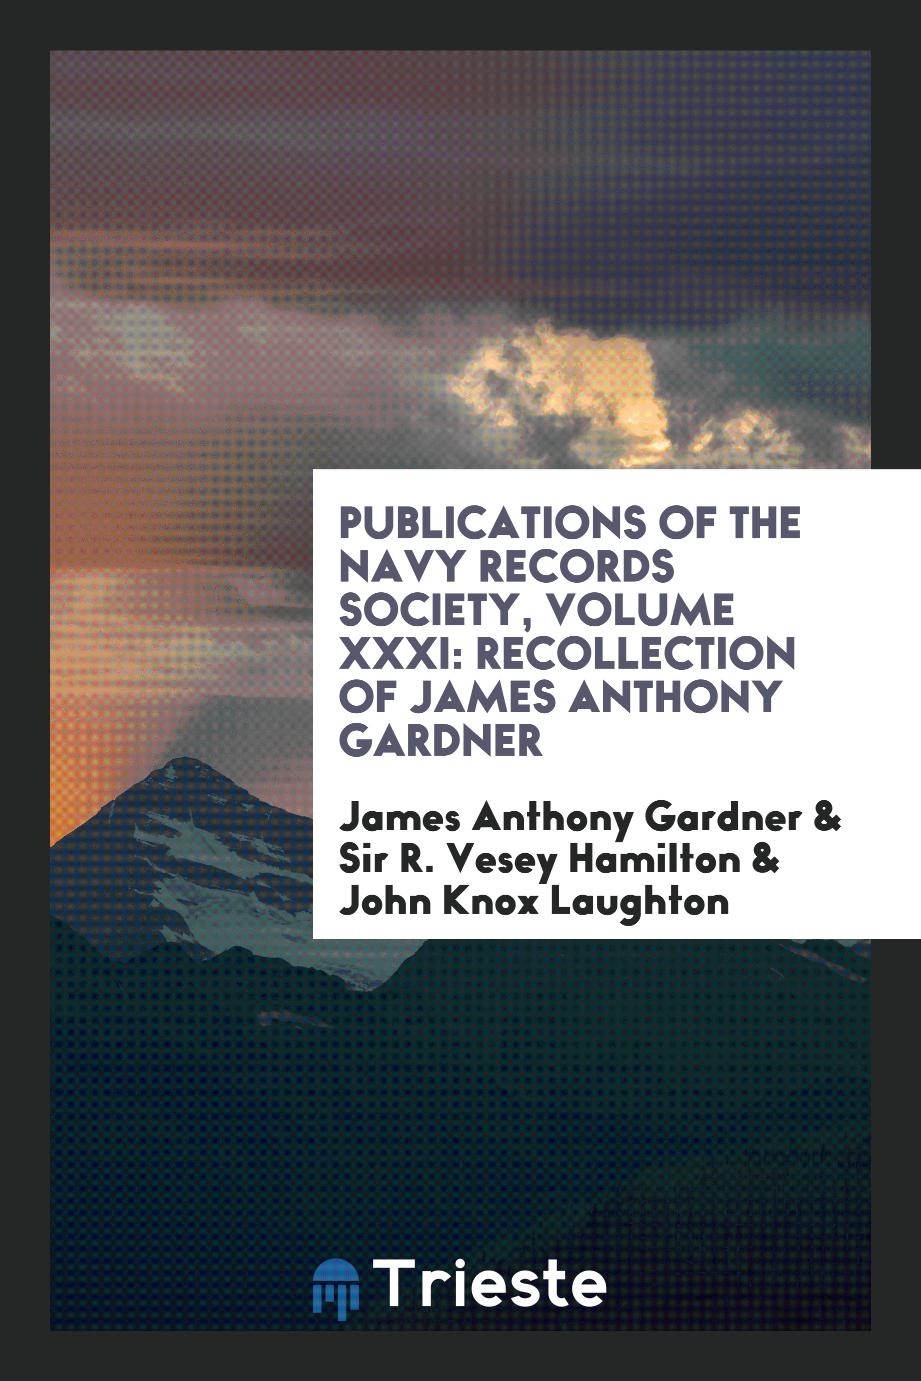 Publications of the Navy Records Society, Volume XXXI: Recollection of James Anthony Gardner